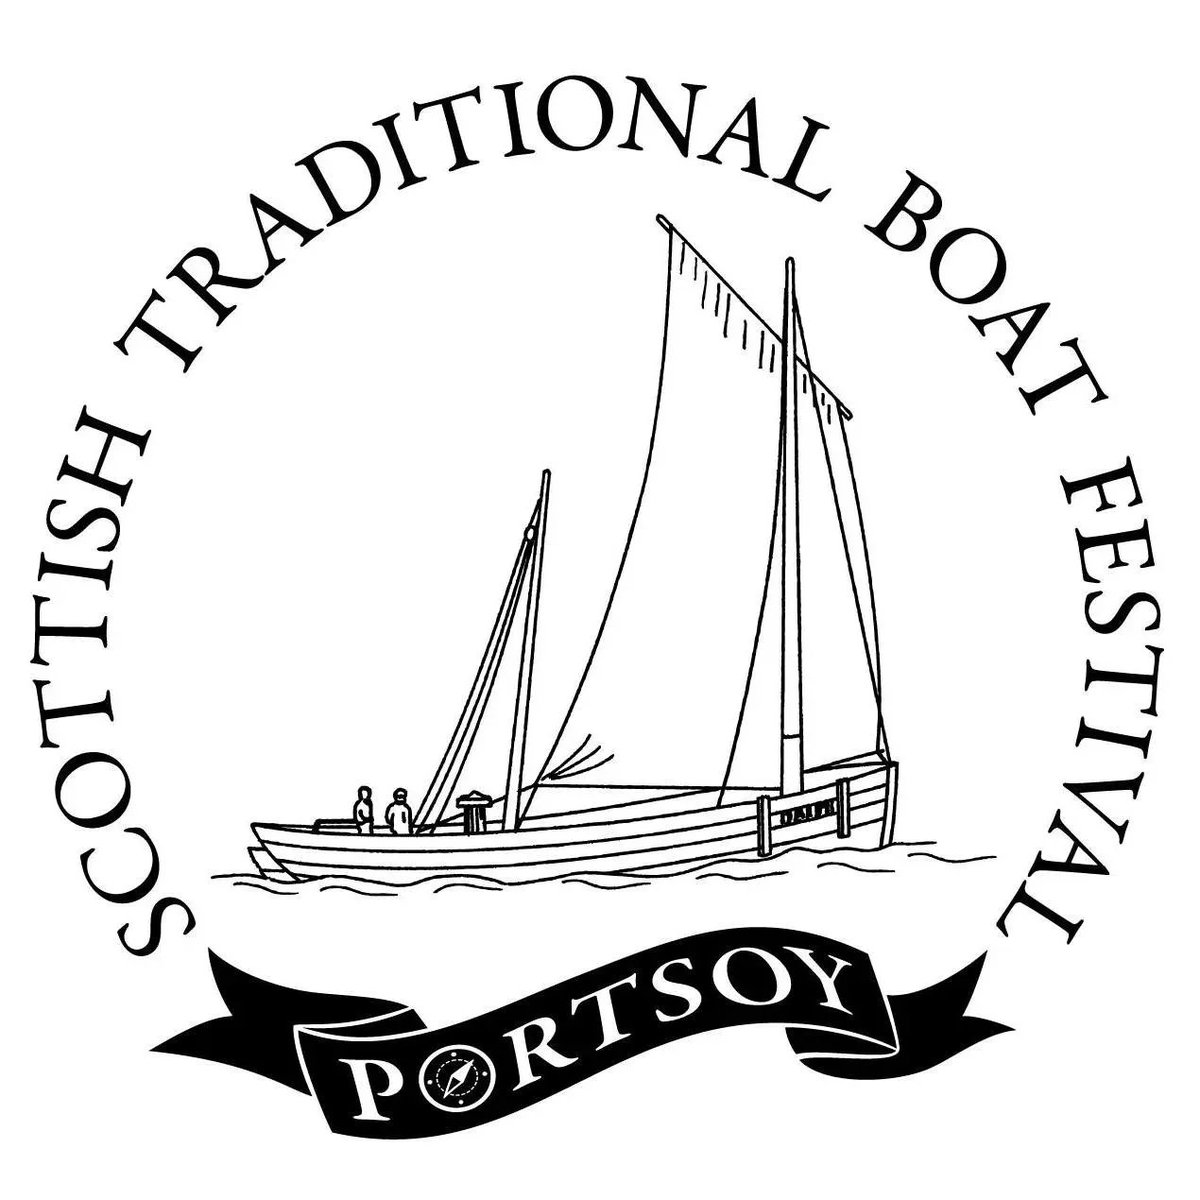 Our Boats Club members will be sailing out on the White Wing to attend the Scottish Traditional #Boat #Festival in Portsoy, 17th-19th of June! If you're around, be sure to say hello and get a closer look at our historic vessel! @STBFPortsoy